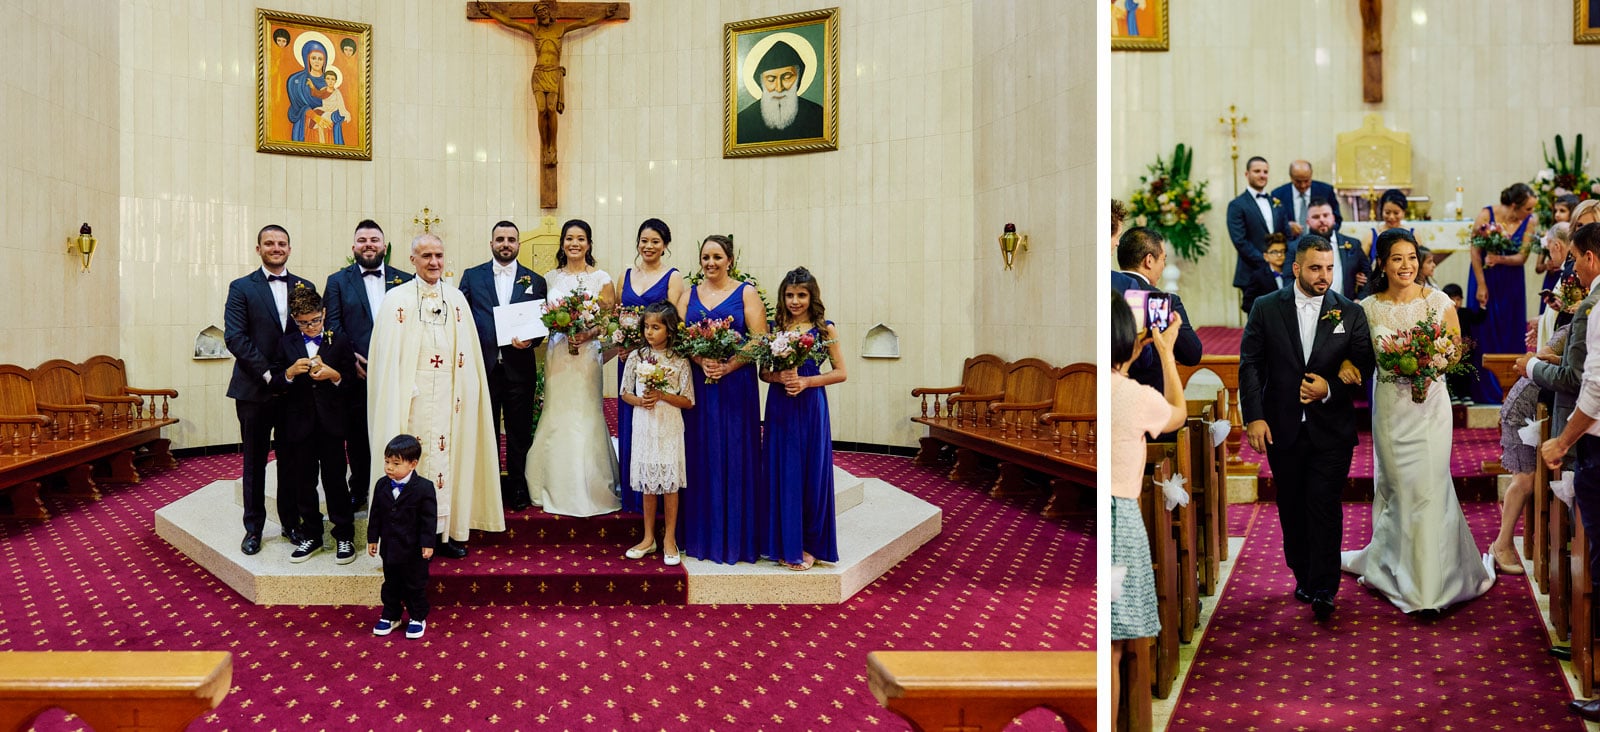 Wedding Ceremony photos at St Charbel's in Punchbowl